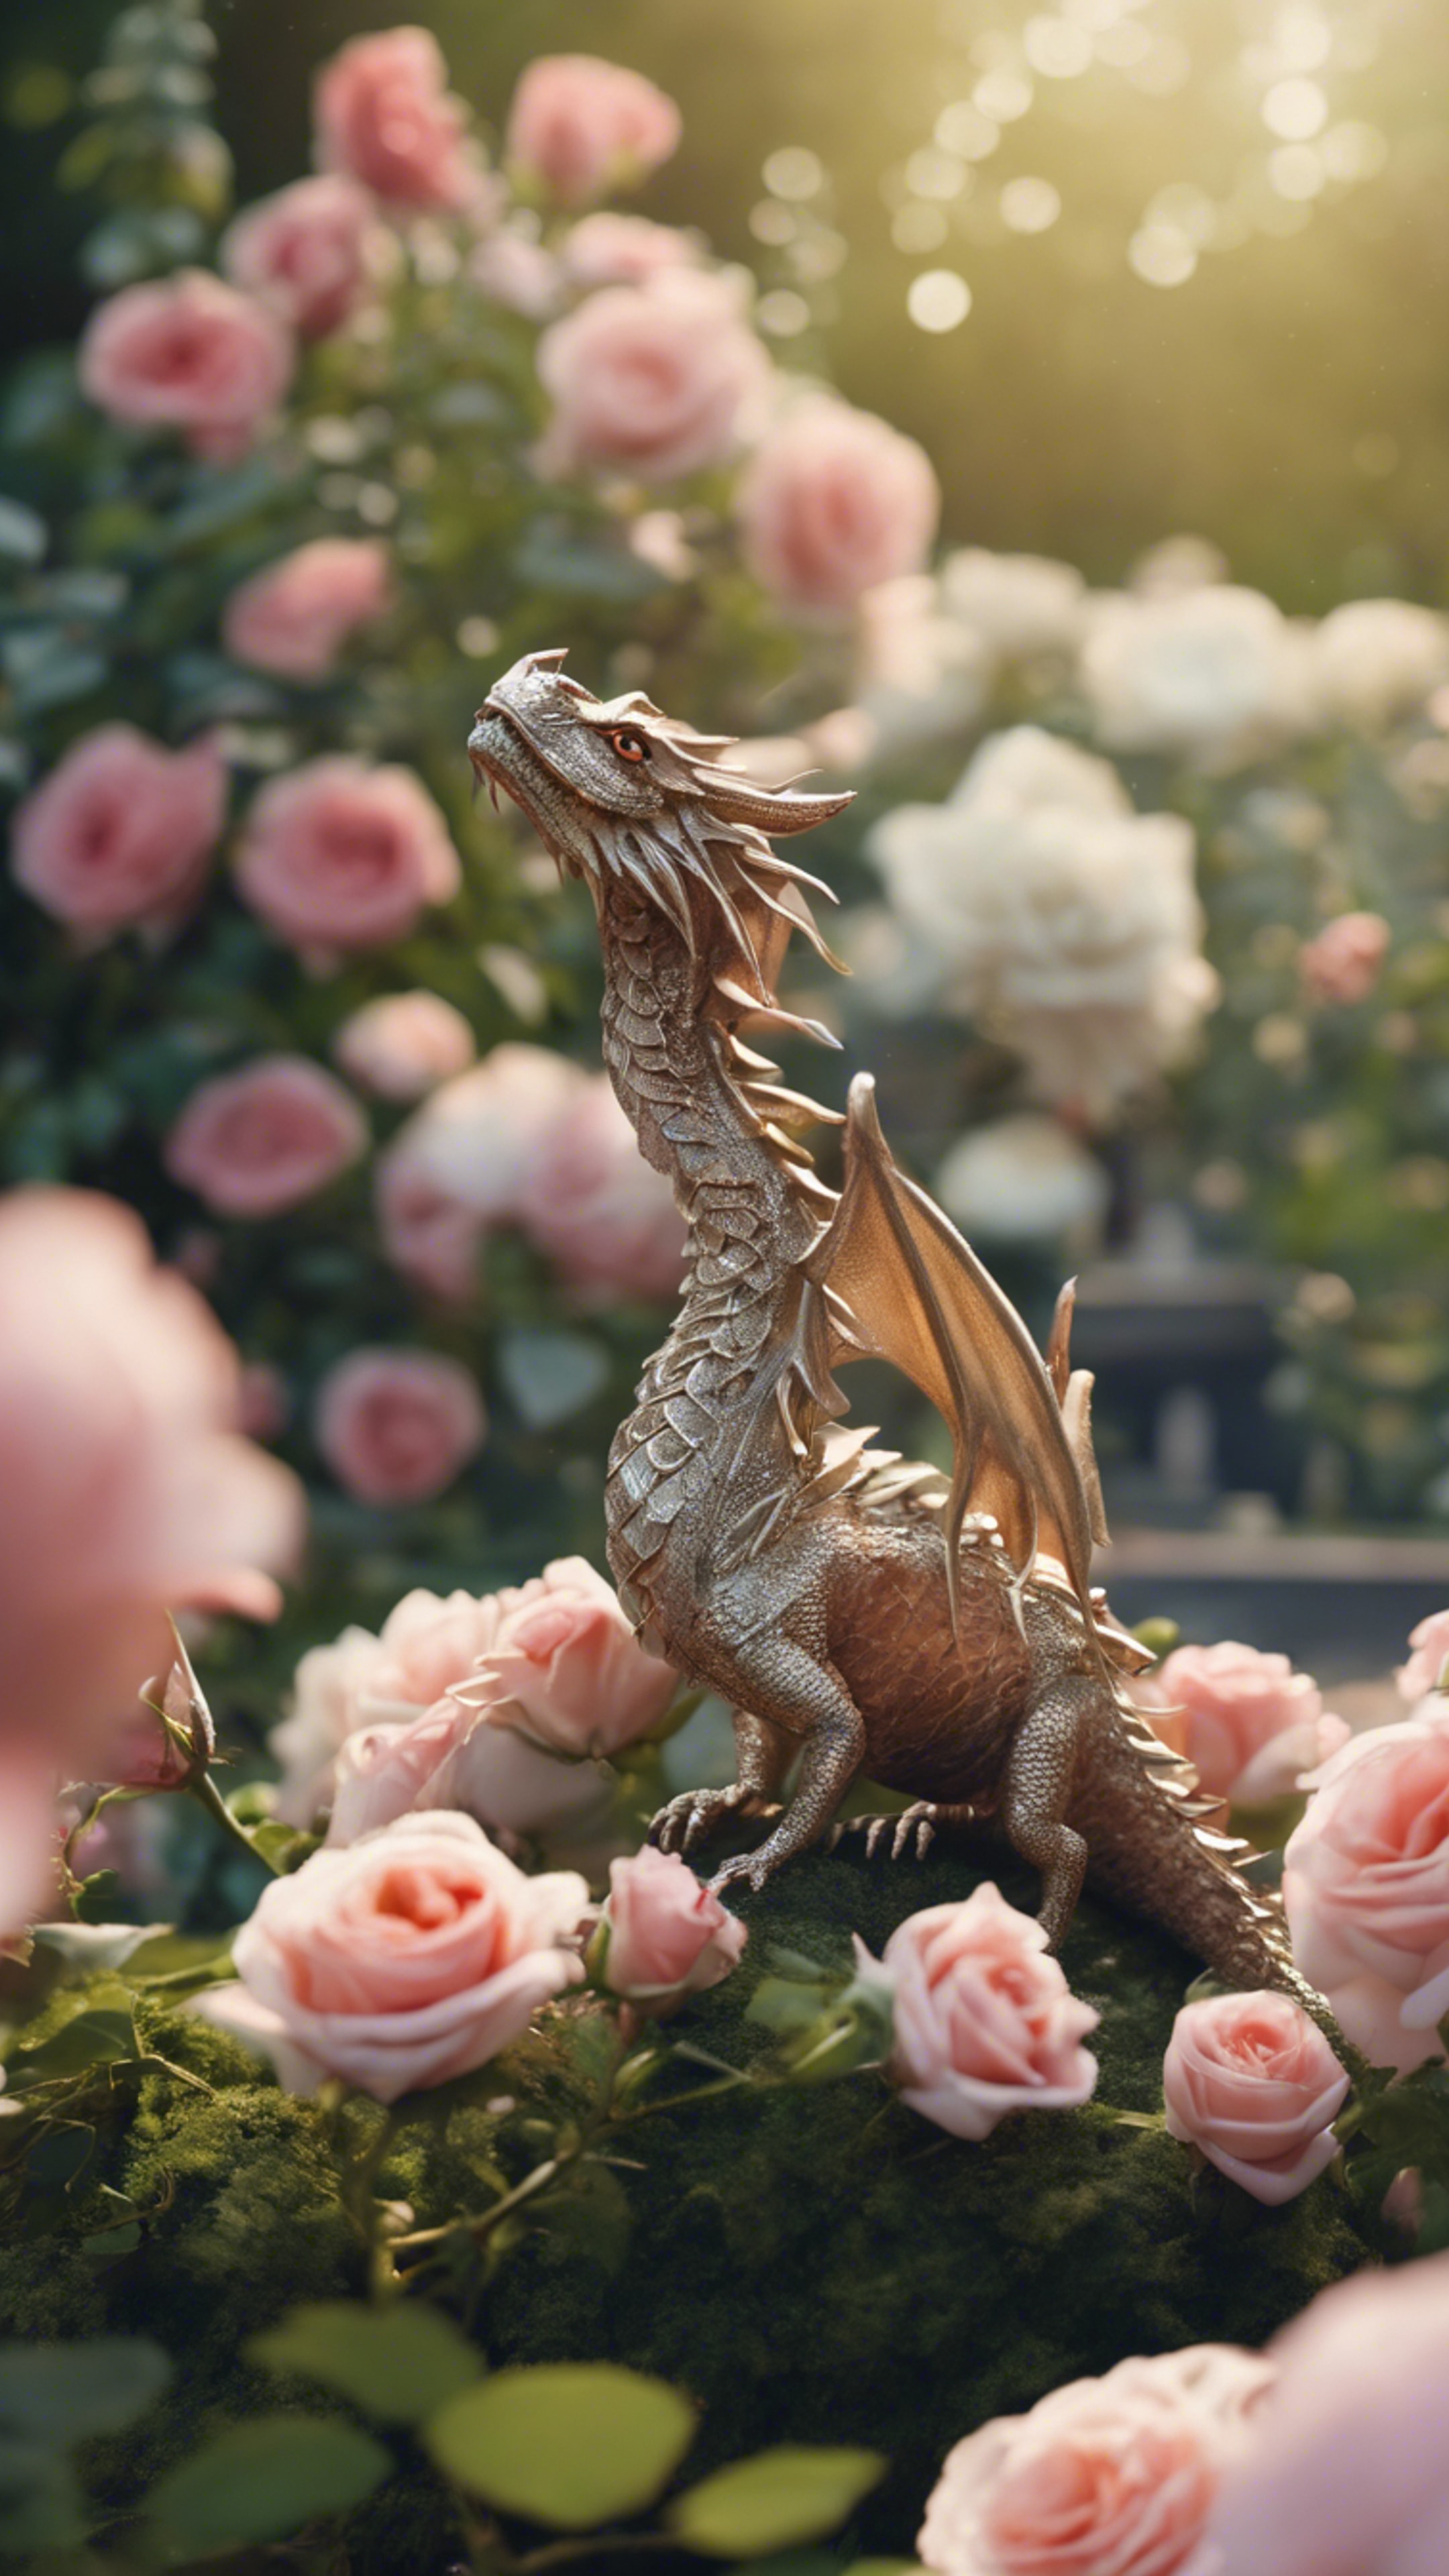 A peaceful garden scene with a tiny, delicate dragon hovering over blooming roses. Wallpaper[938d180fa7284dedb4af]